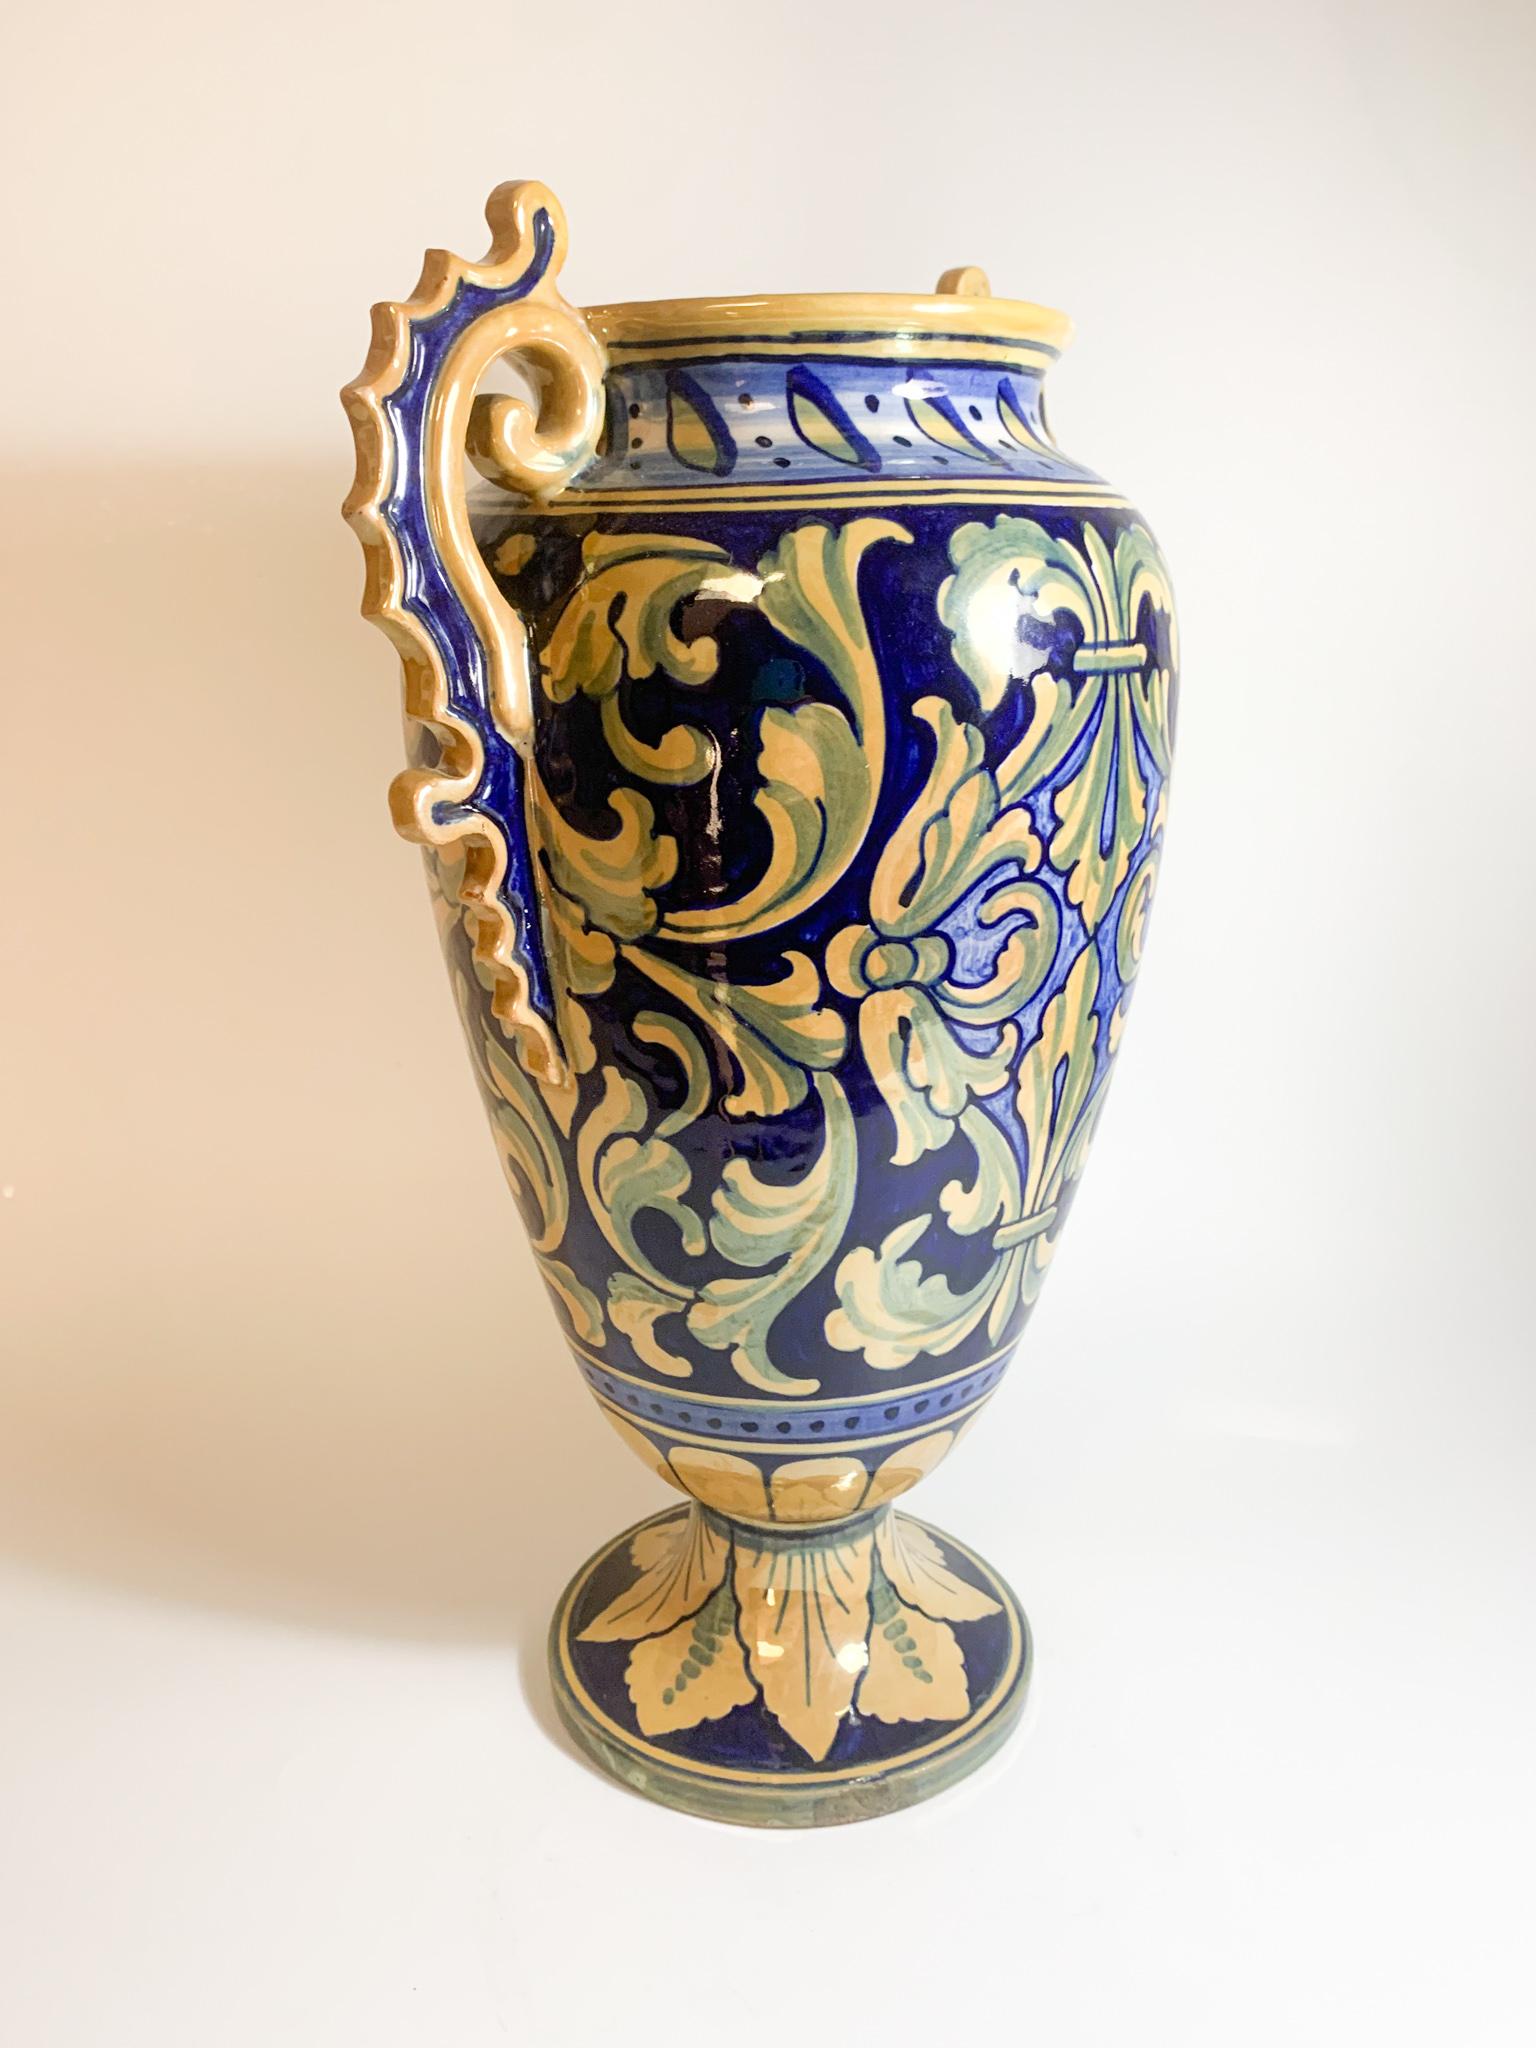 Italian Hand Painted Iridescent Ceramic Vase by Gualdo Tadino from the 1950s For Sale 6